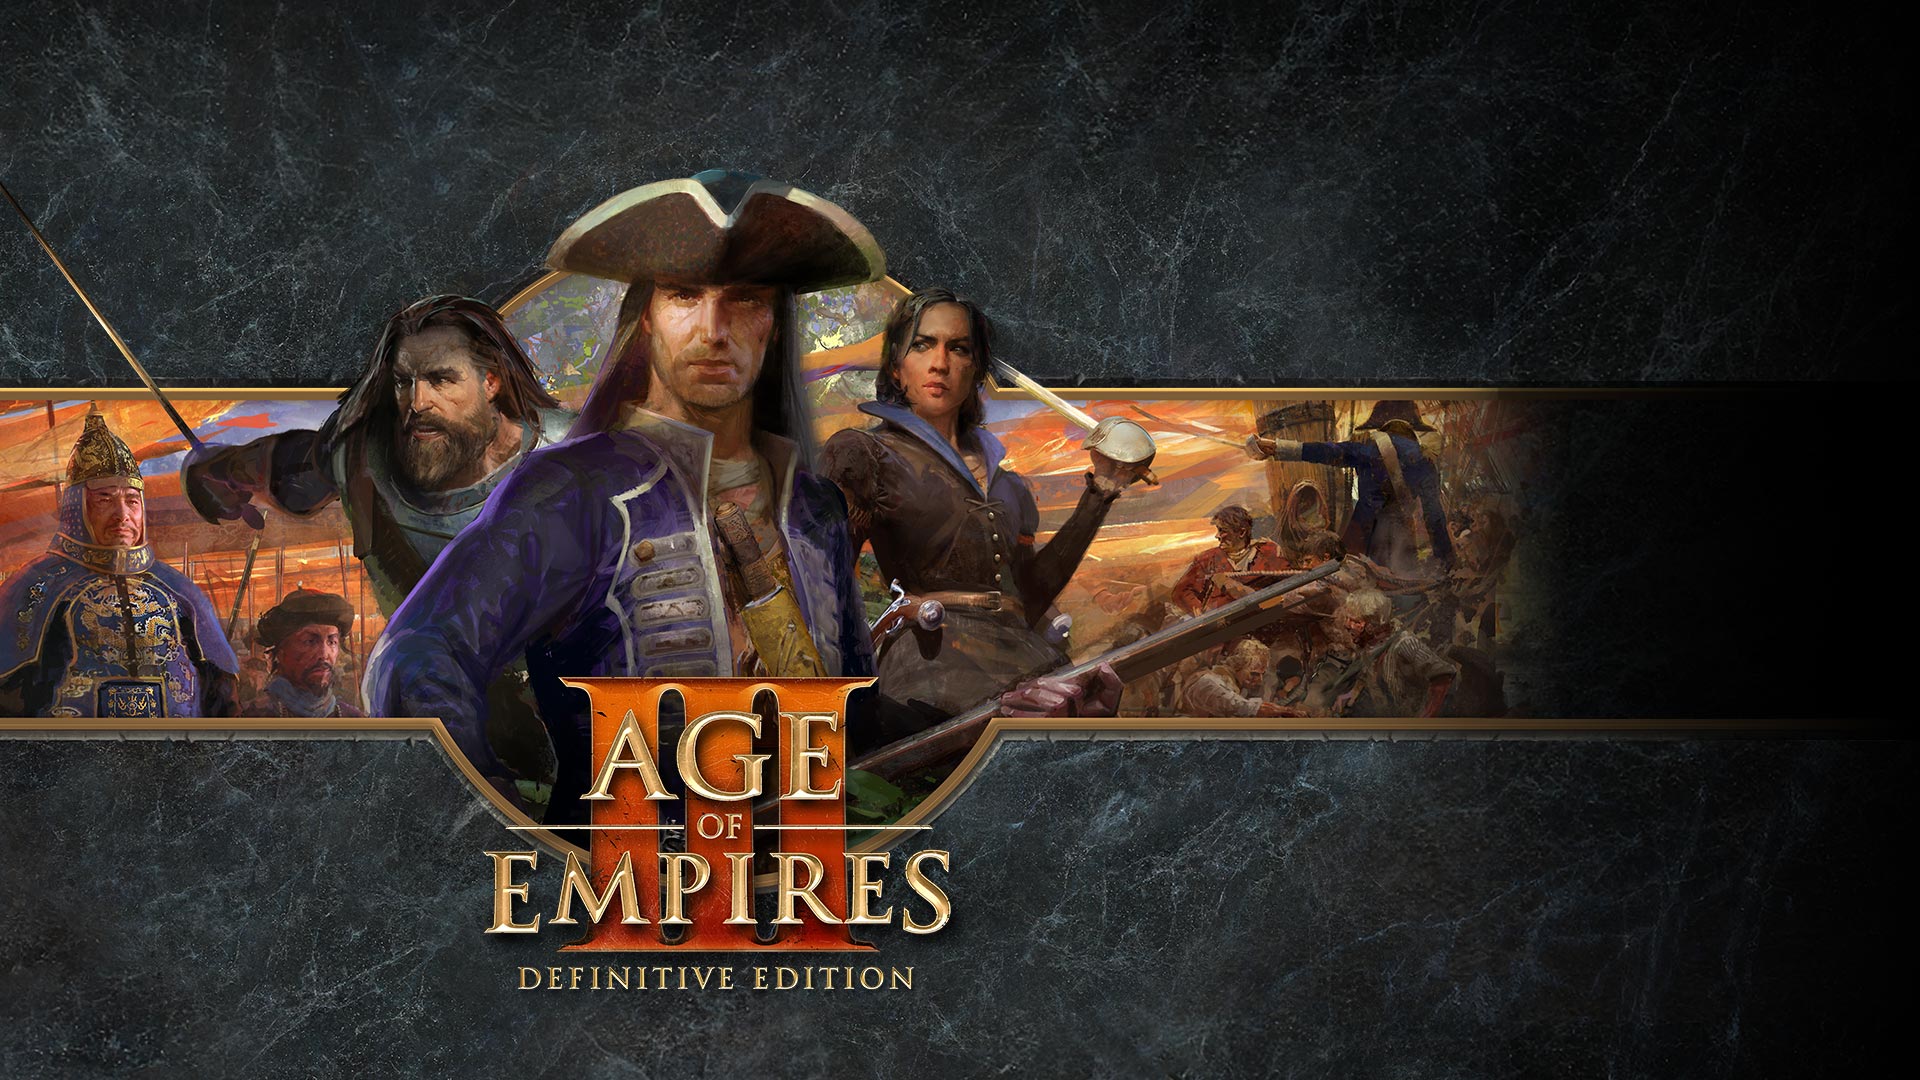 Age of Empires III: Definitive Edition、ポーズを取るキャラクター